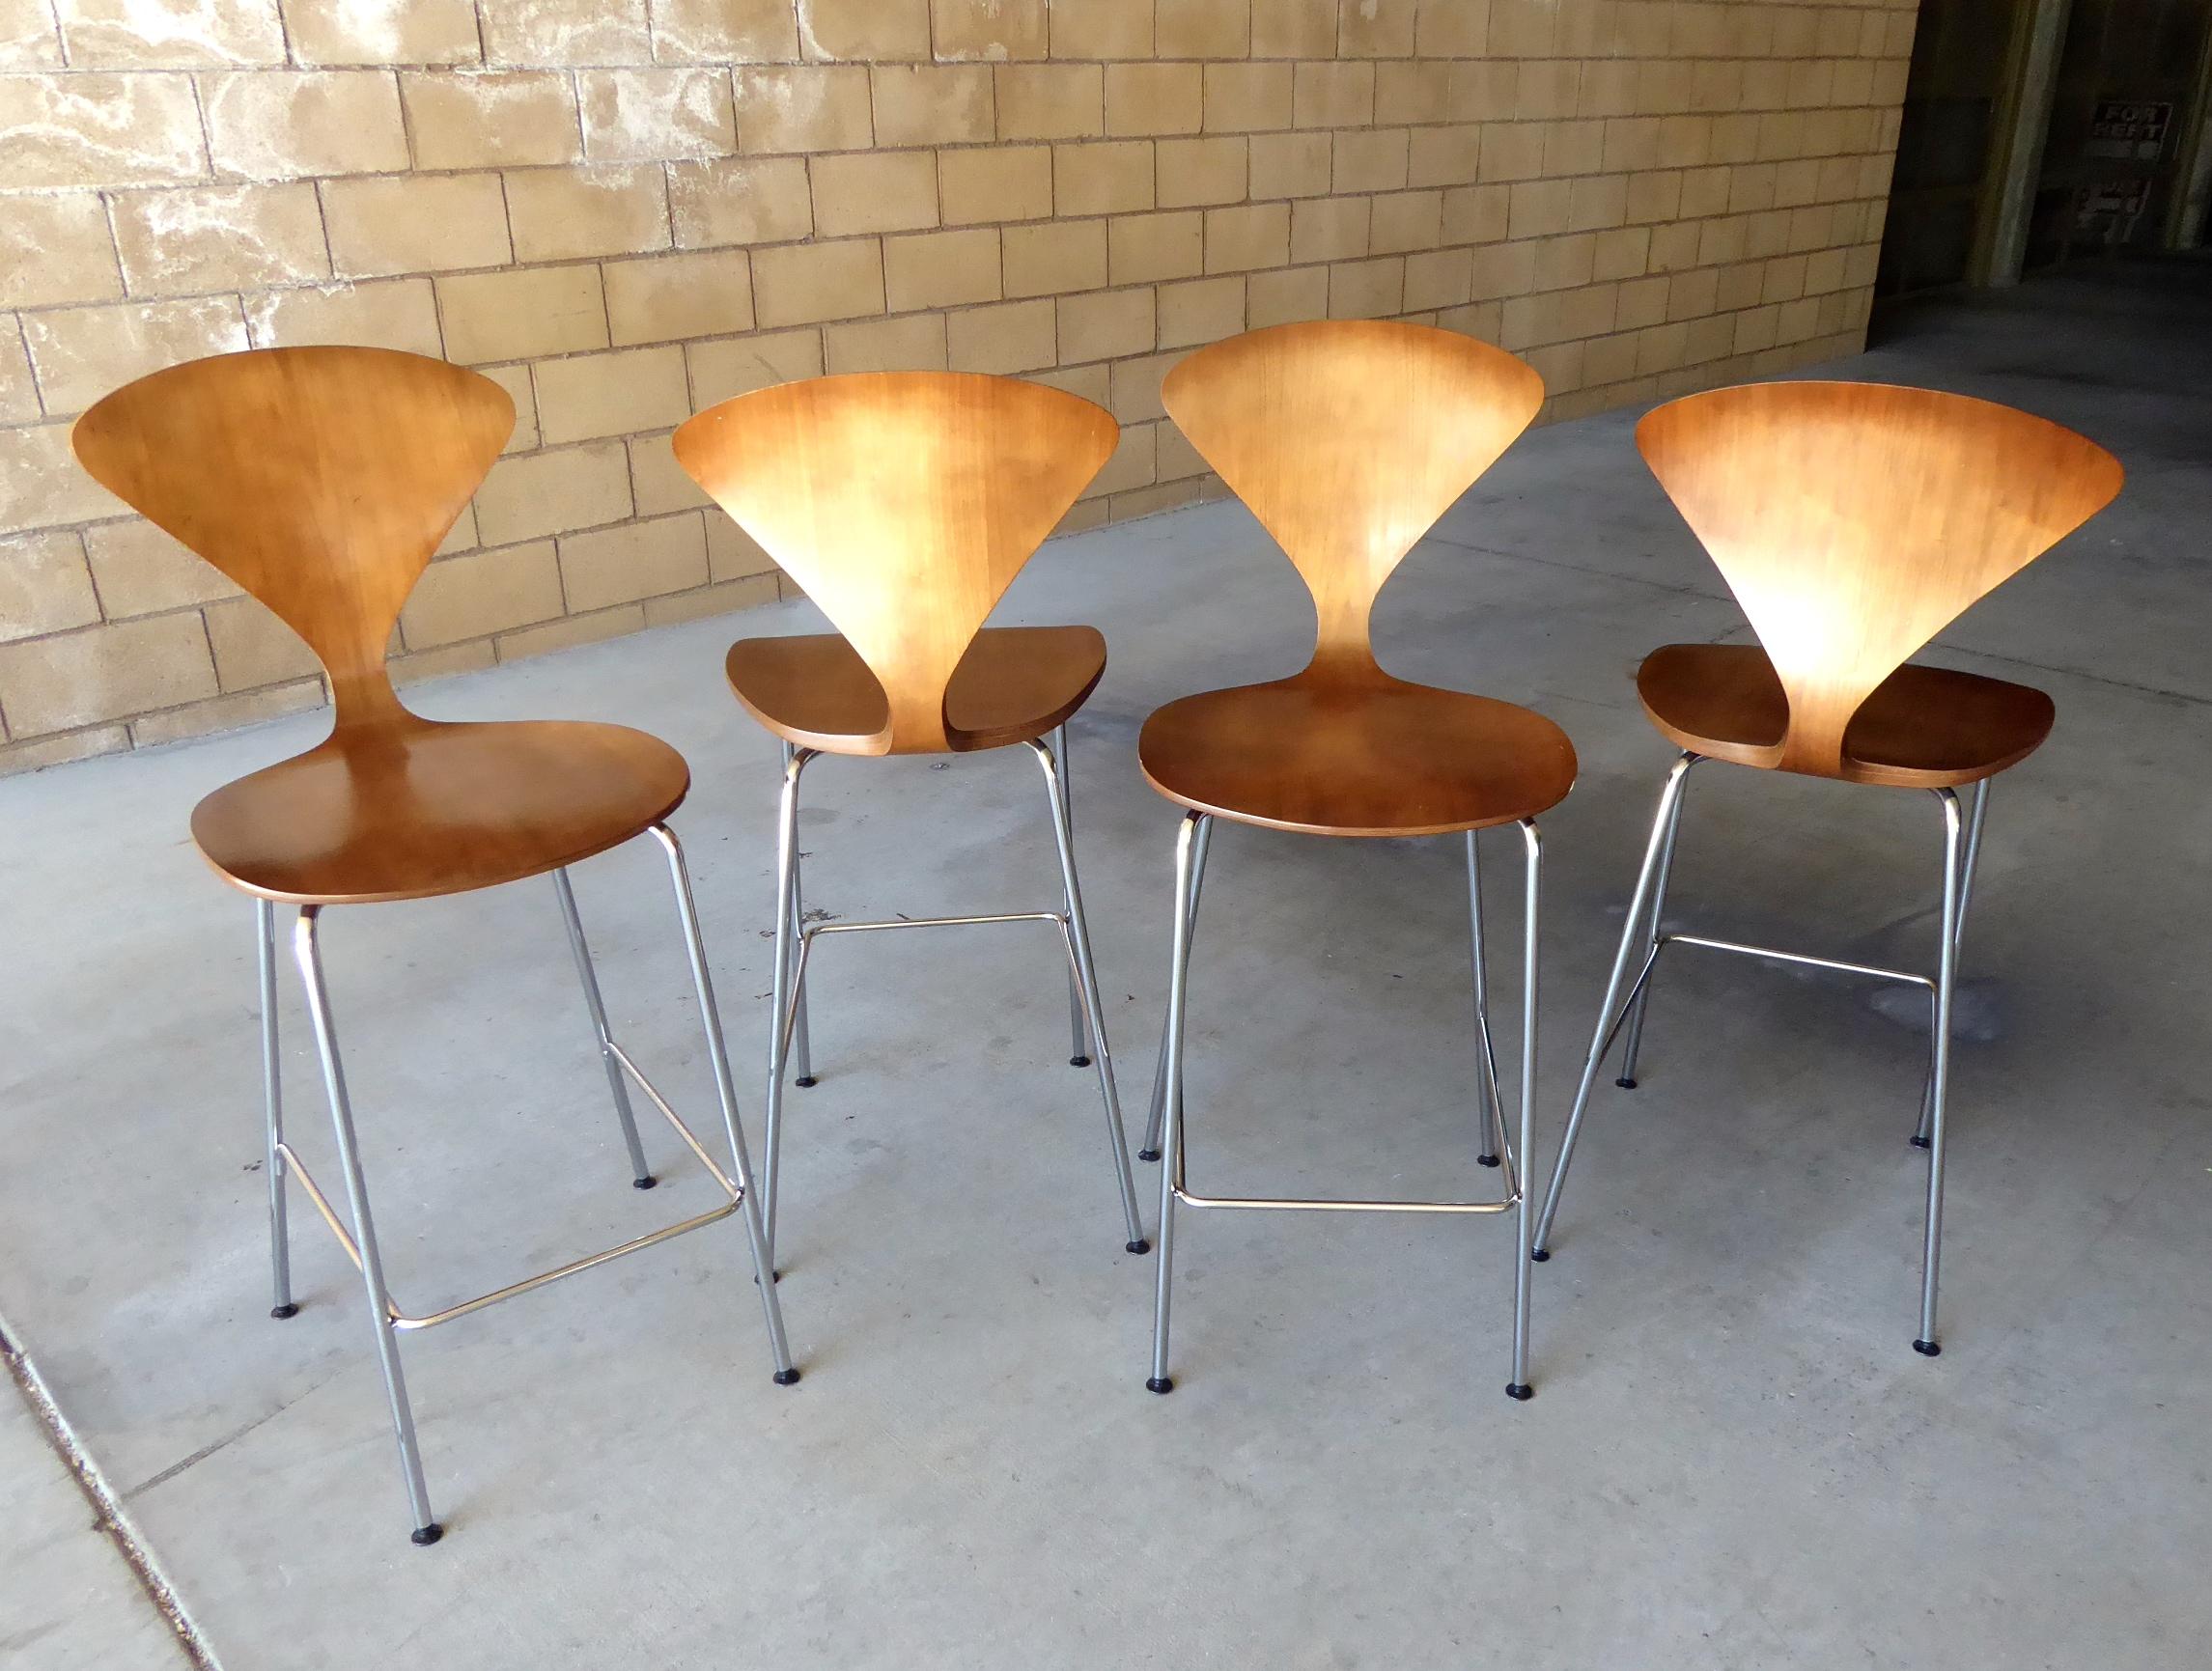 A set of four metal based counter stools with molded Classic-walnut plywood seats by Norman Cherner manufactured in 2010. This set of stools was acquired from a home in Palm Springs.
 